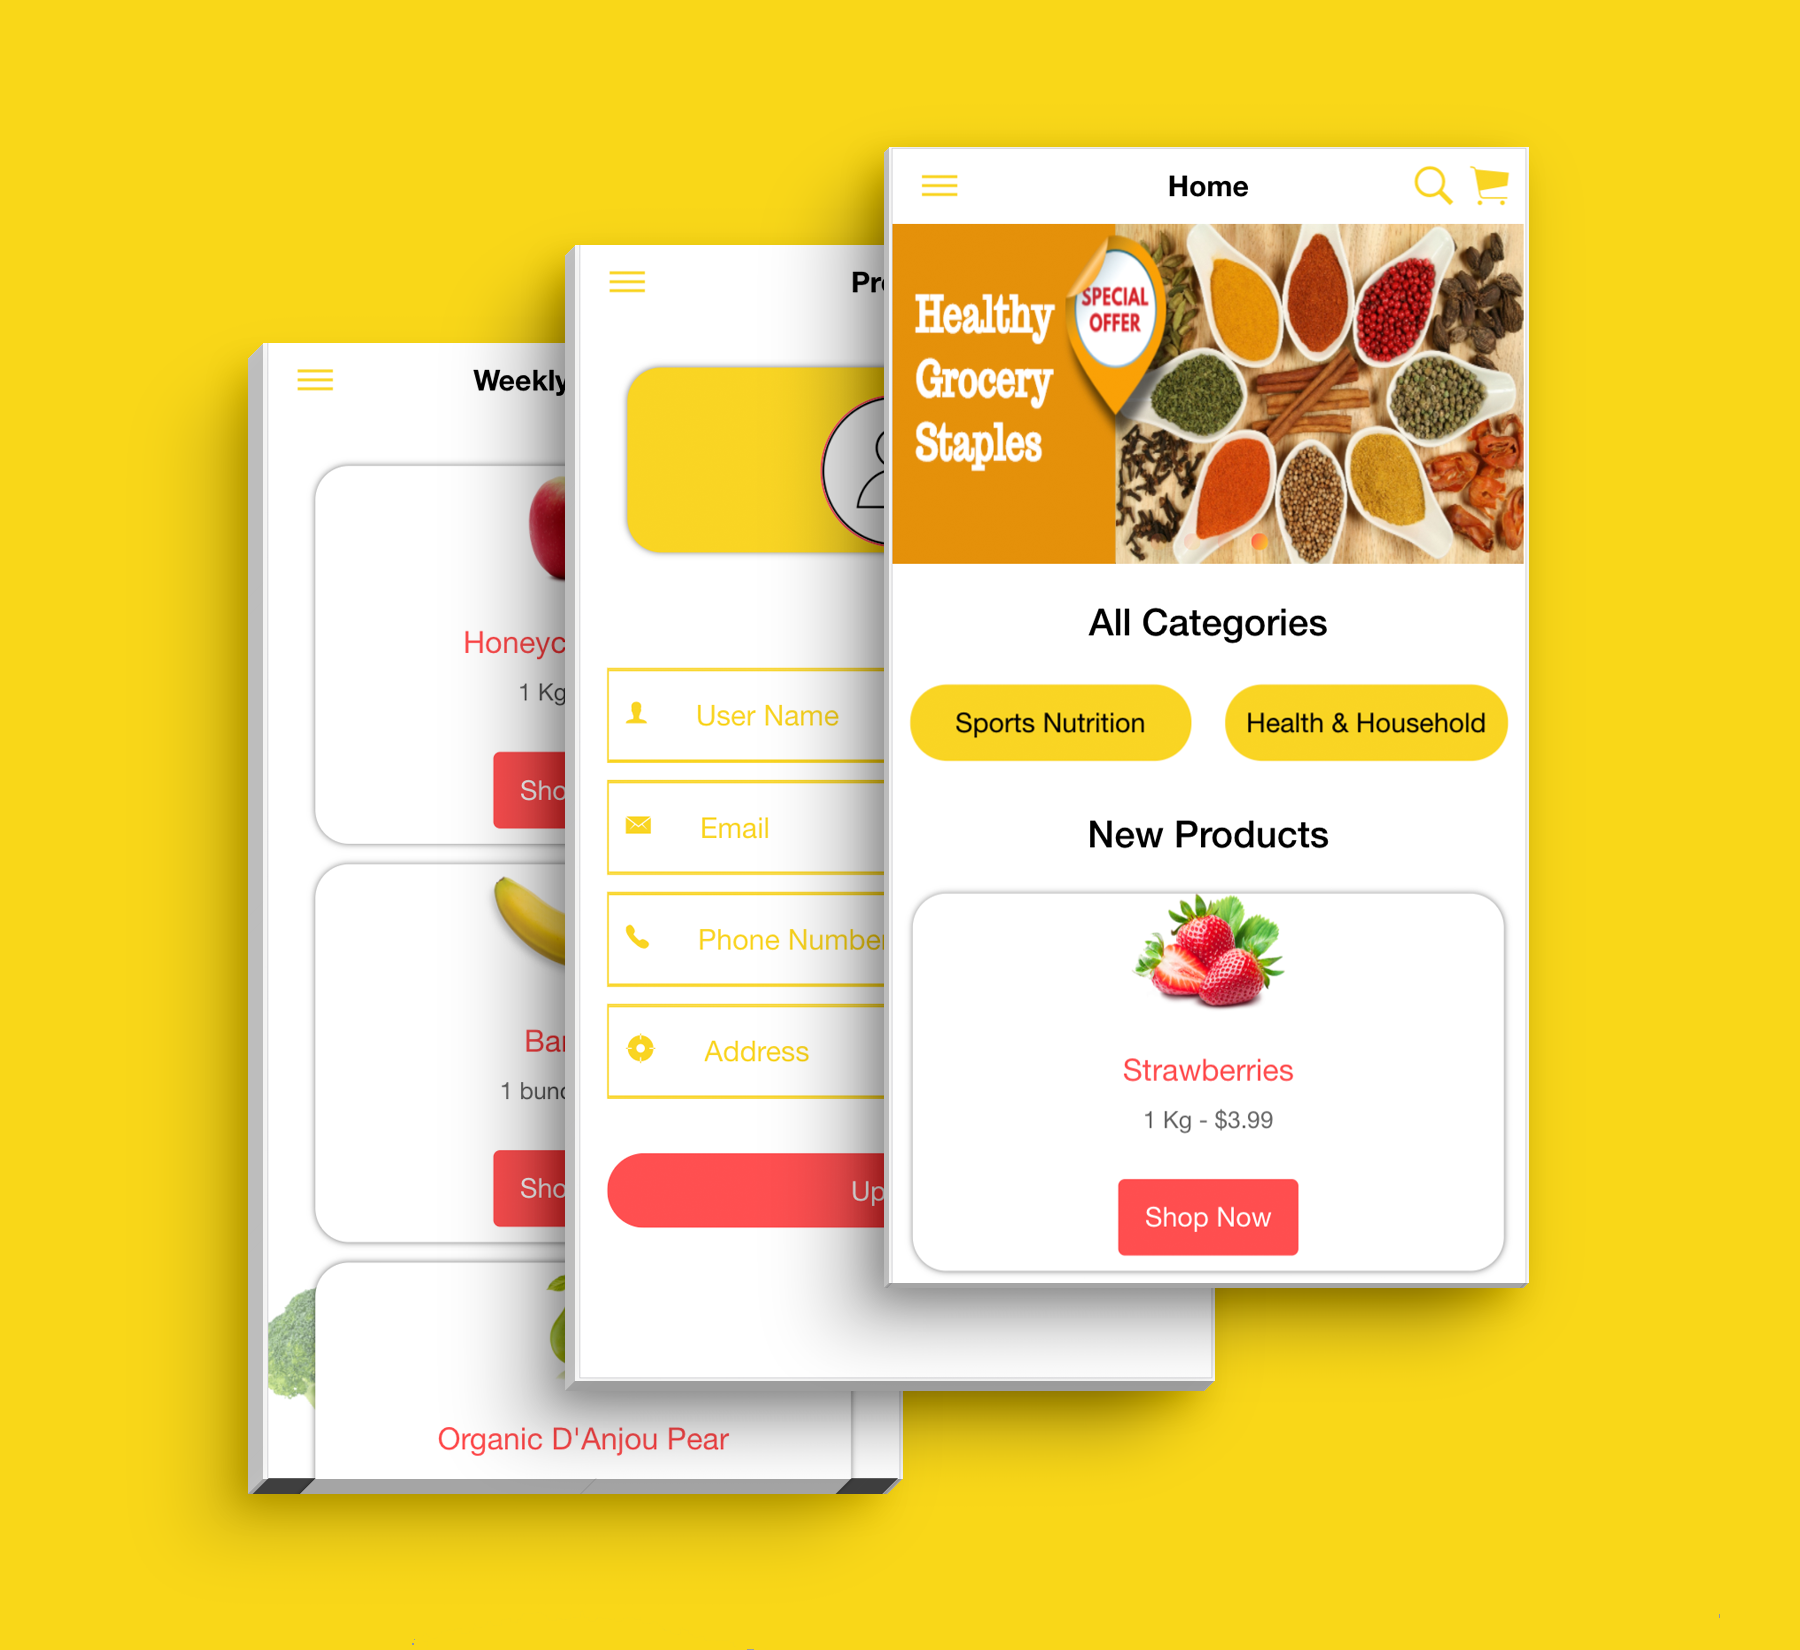 Complete Multipurpose eCommerce Template UI Grocery App Supports Multiple Language i18n - 10